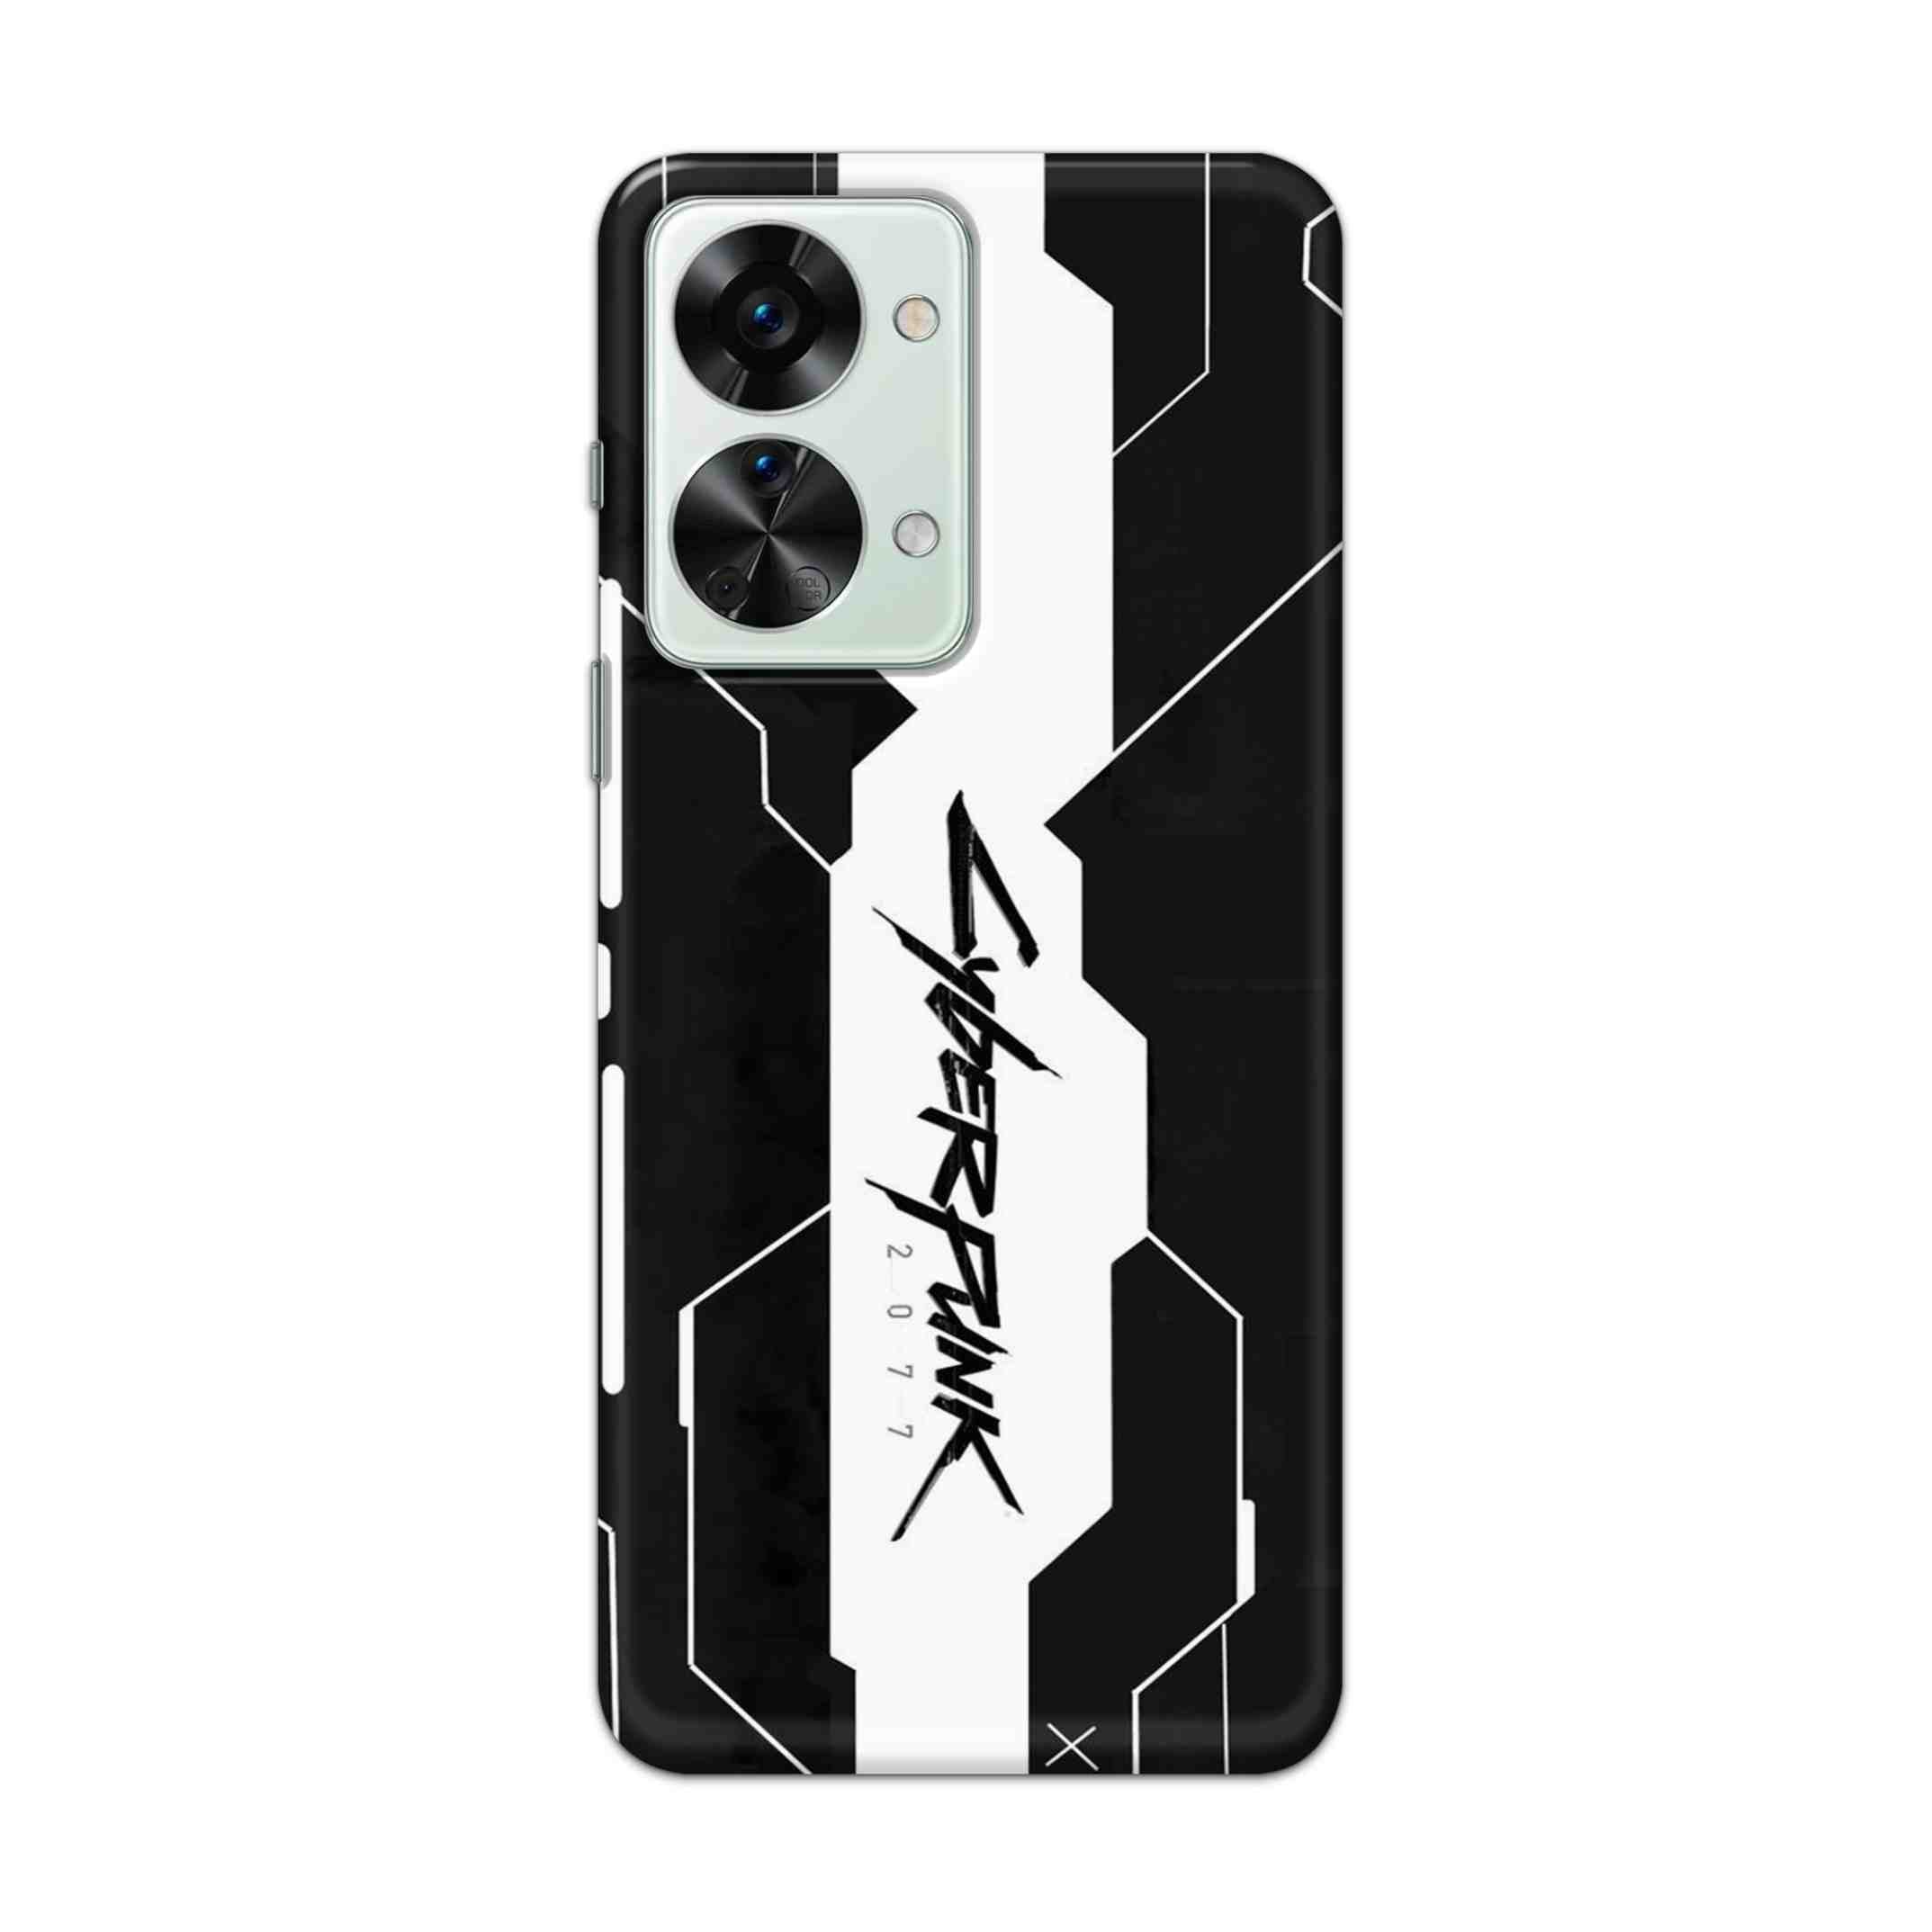 Buy Cyberpunk 2077 Art Hard Back Mobile Phone Case Cover For OnePlus Nord 2T 5G Online